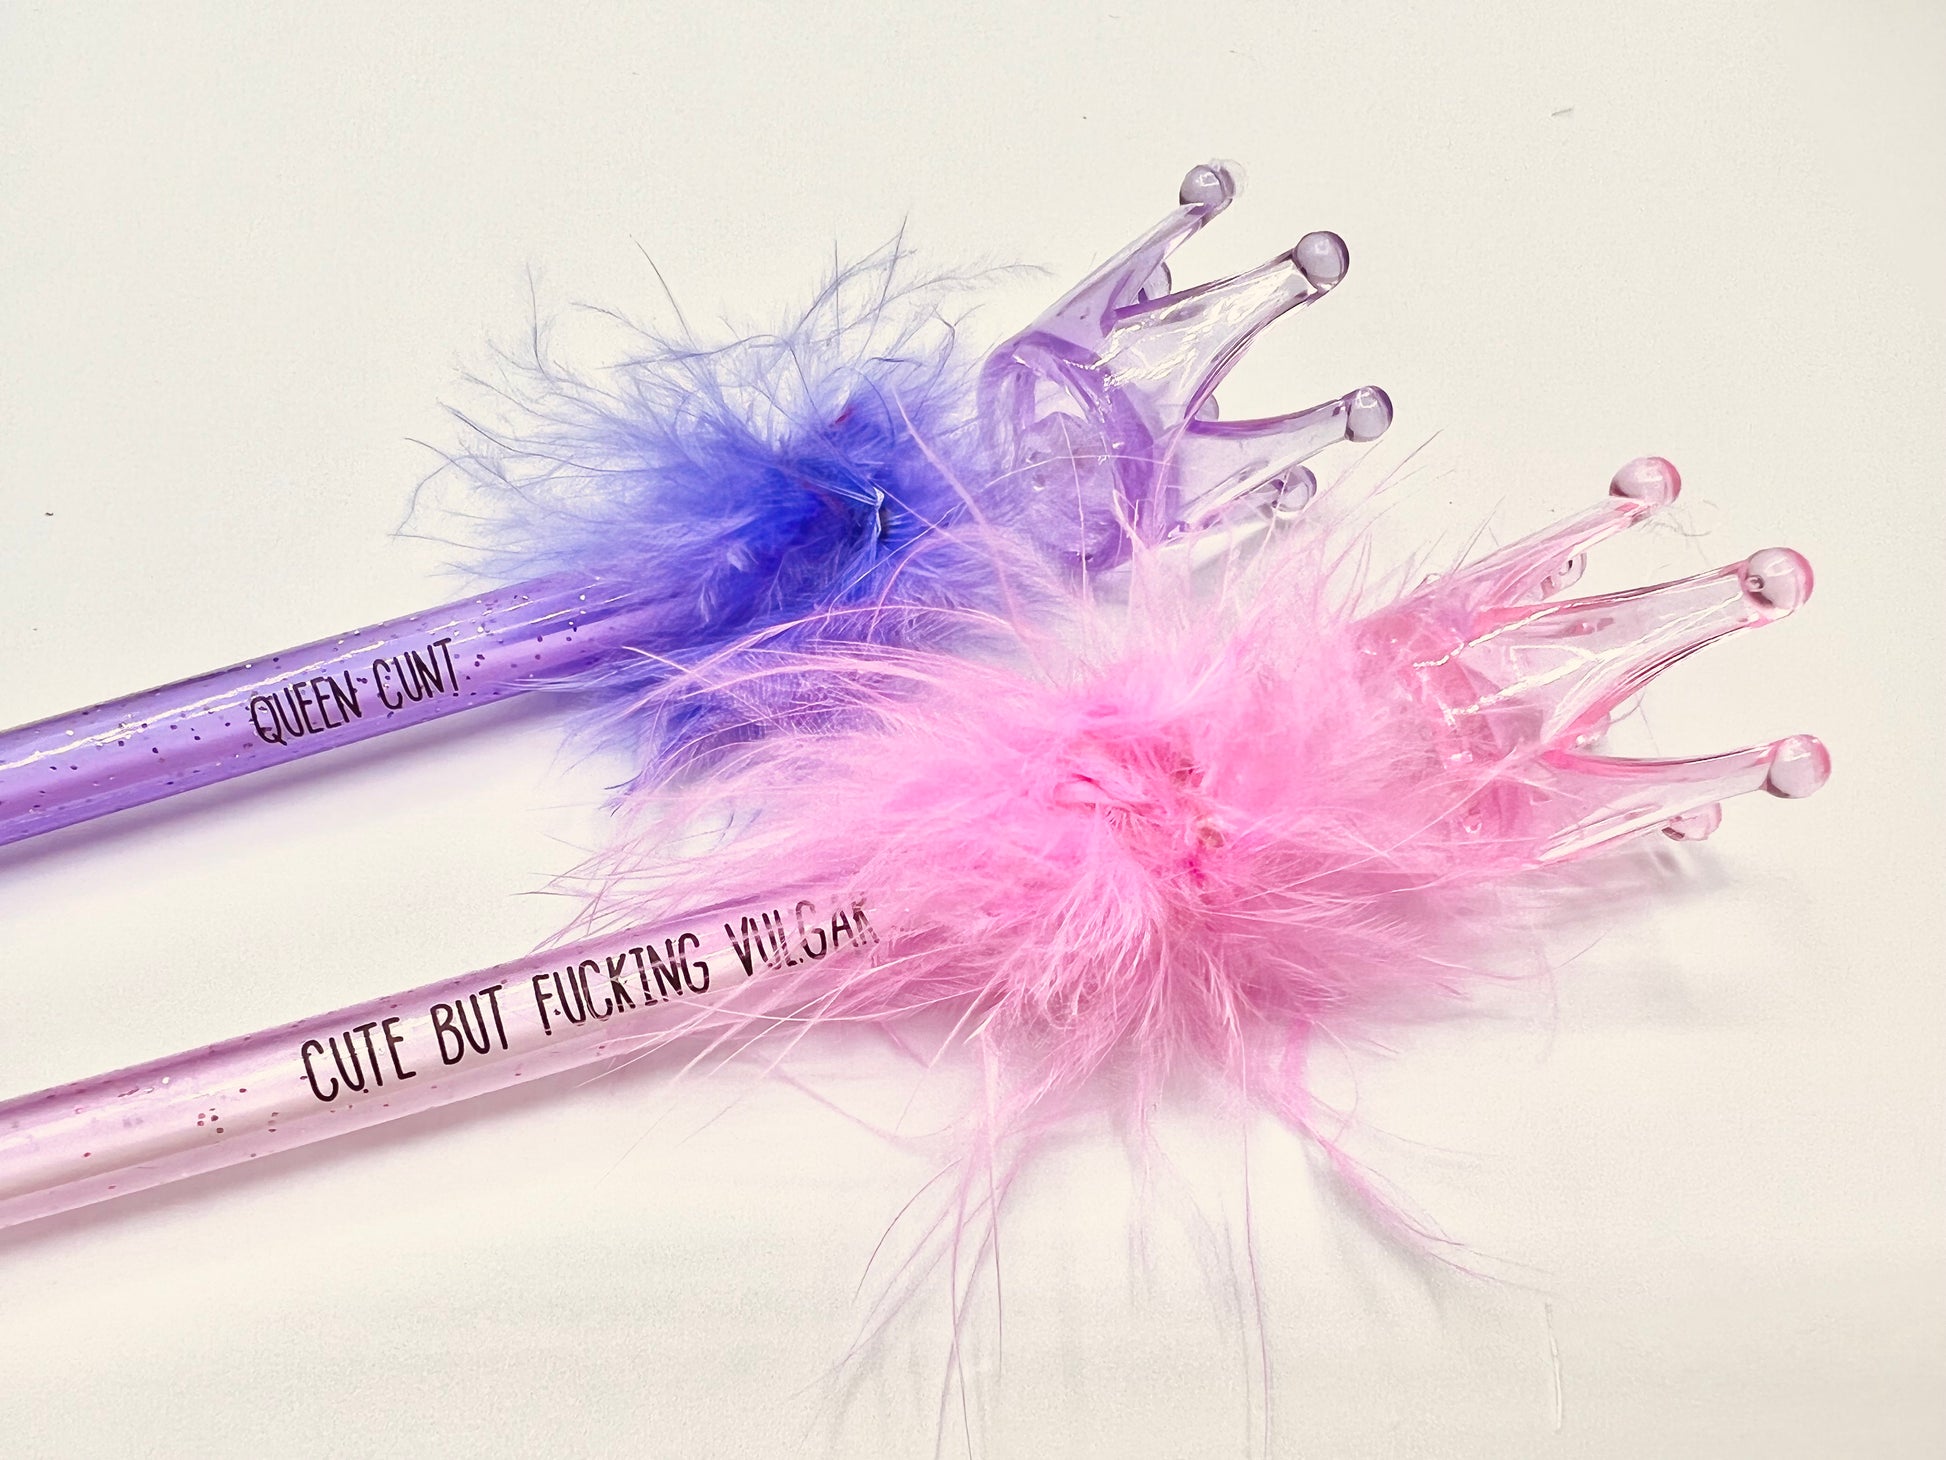 2 pack pens, pink and purple. Pink pen says 'cute but fucking vulgar' the purple says 'queen cunt'. Both pens have a glittery base, fluffy top and a plastic crown topper. Blue ink